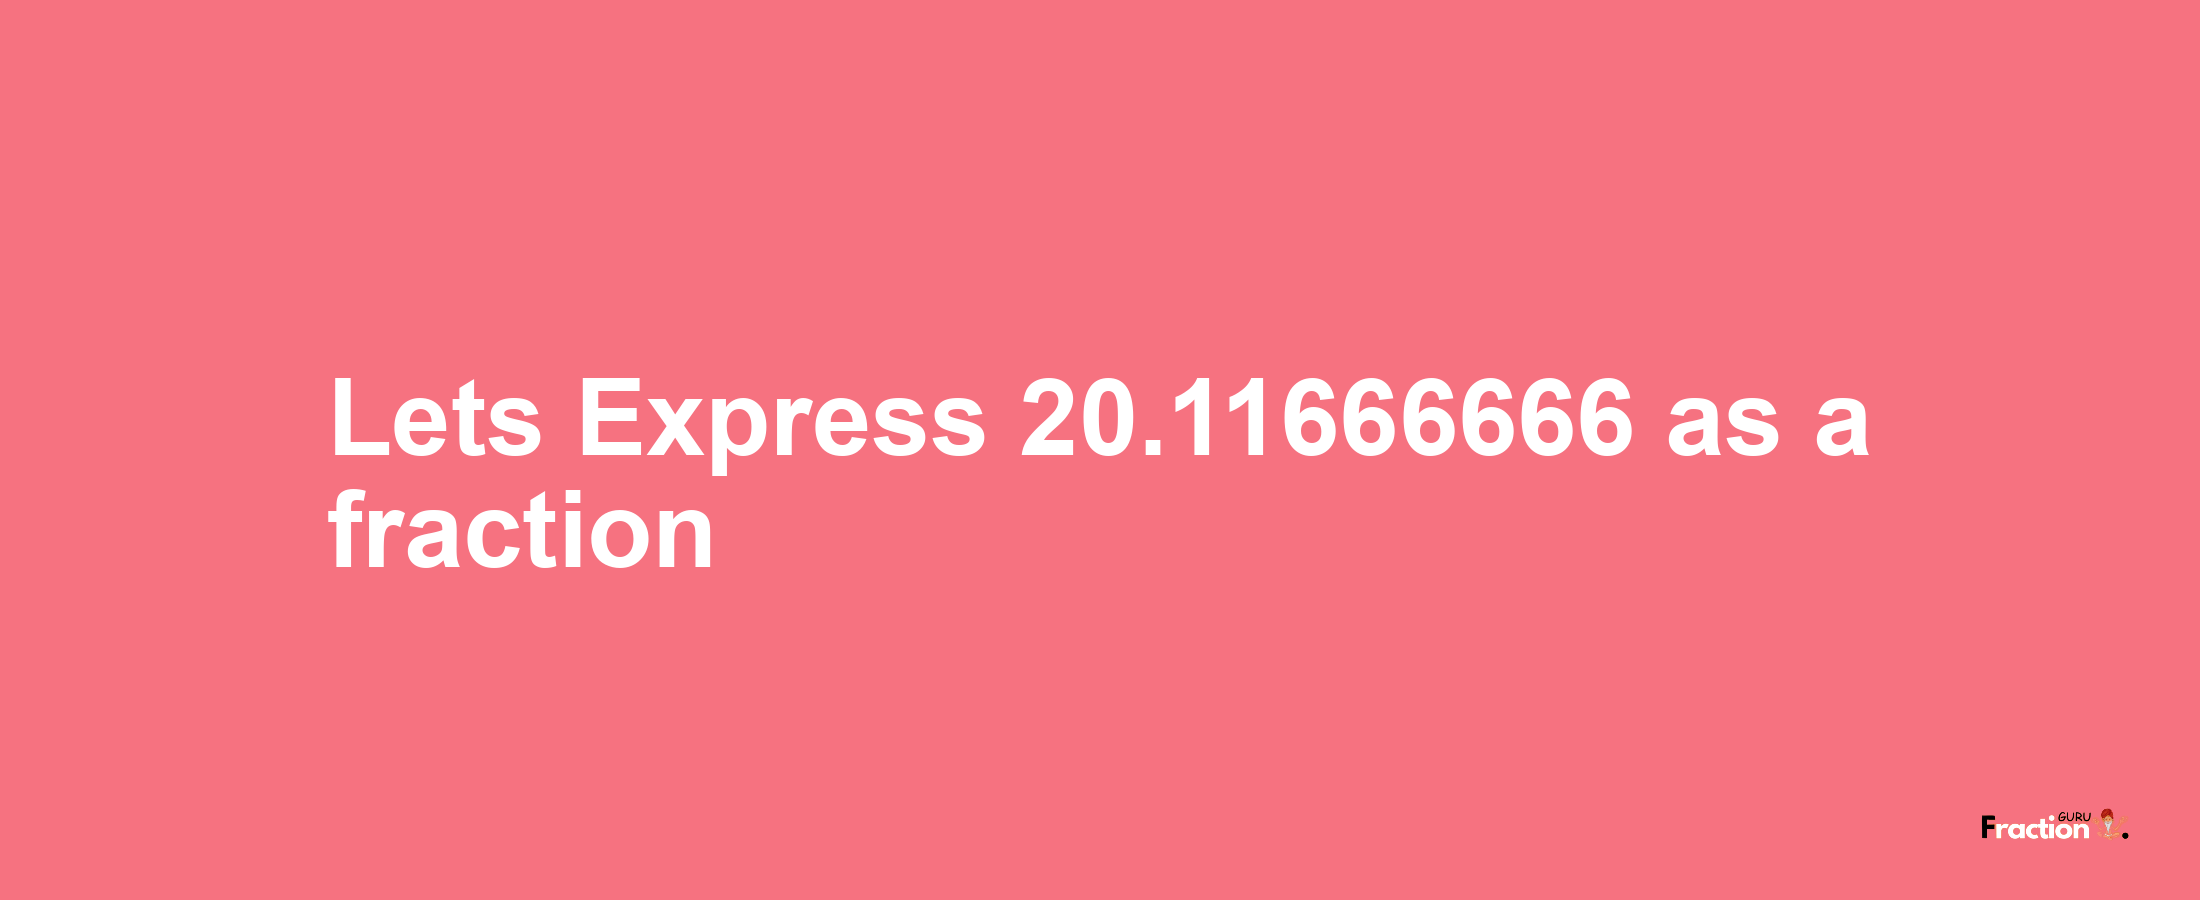 Lets Express 20.11666666 as afraction